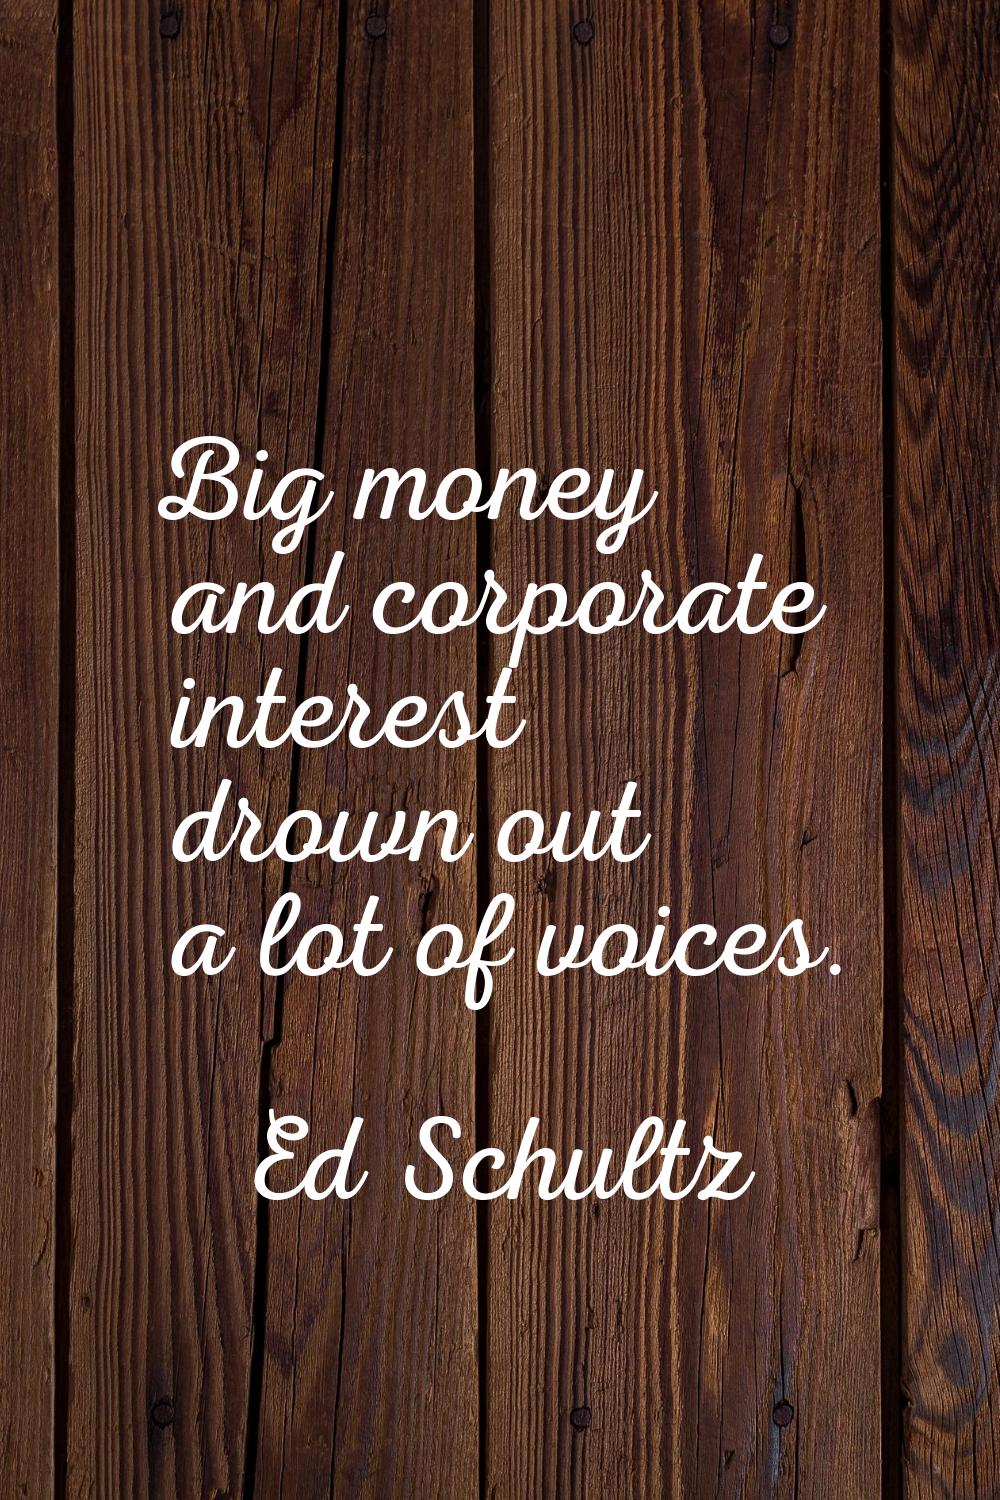 Big money and corporate interest drown out a lot of voices.